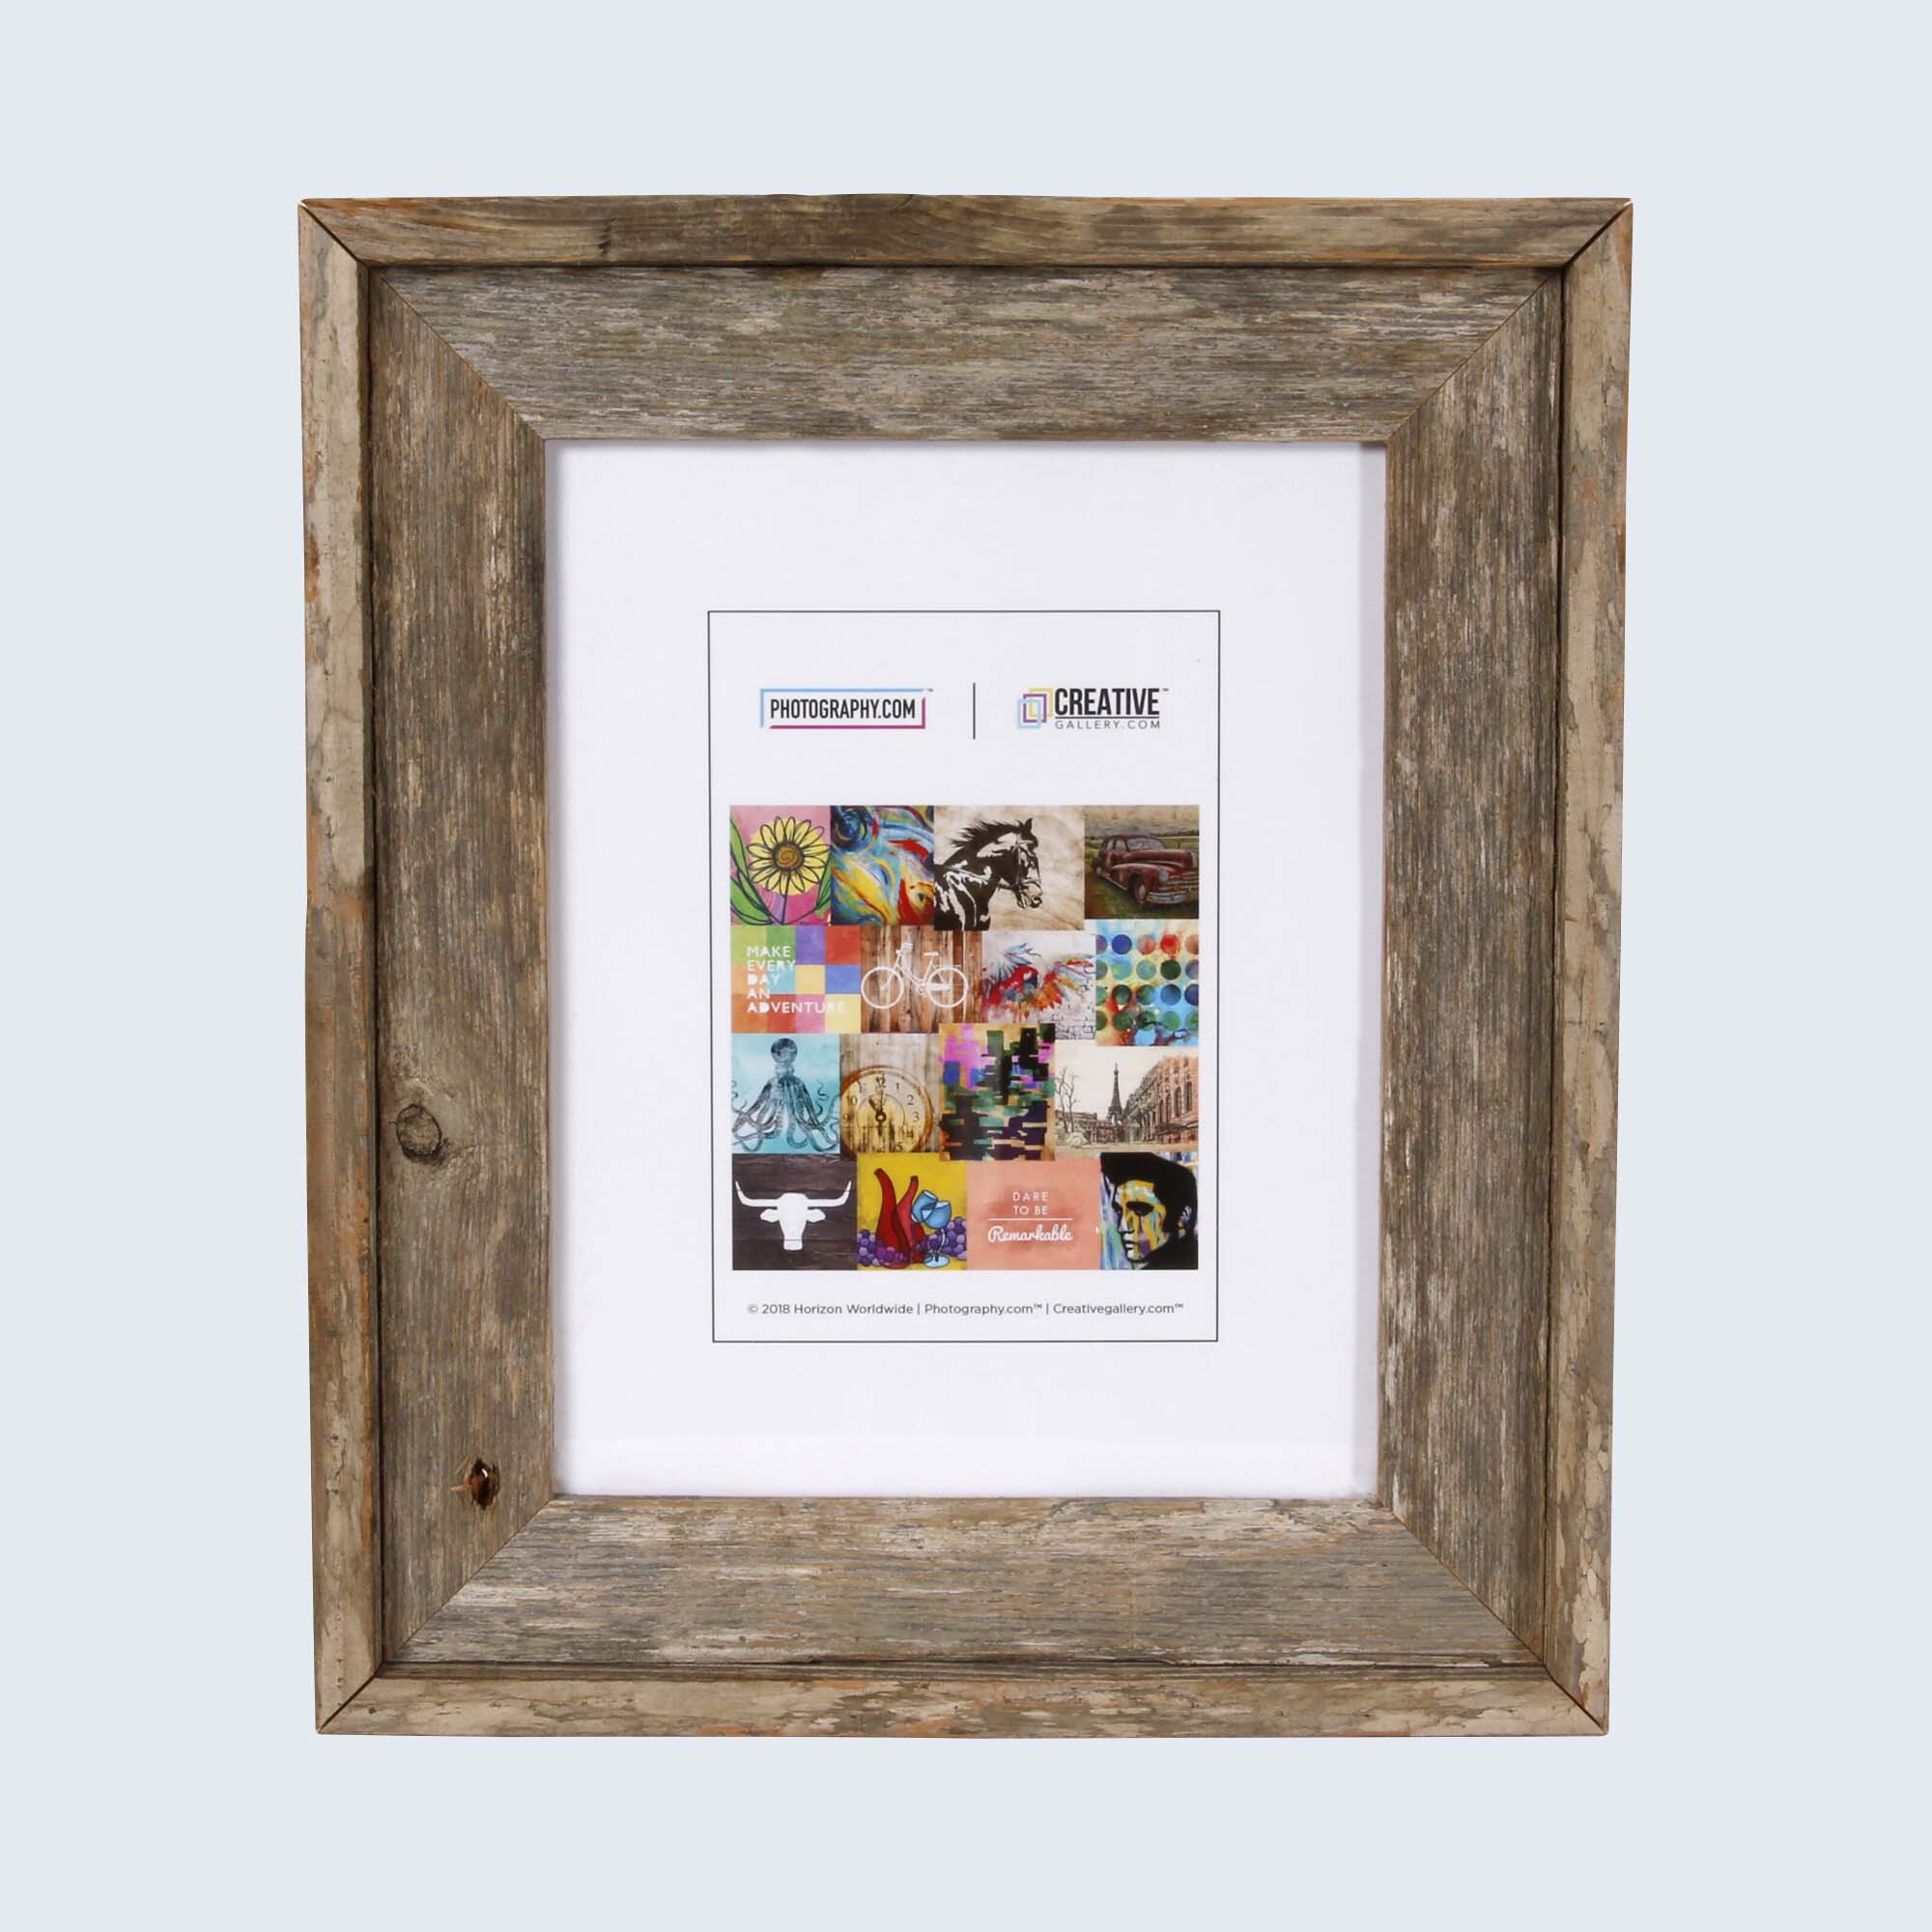 Driftwood 15 Weathered Black 16x24 Picture Frame Matted to Display a 12x18 Photo